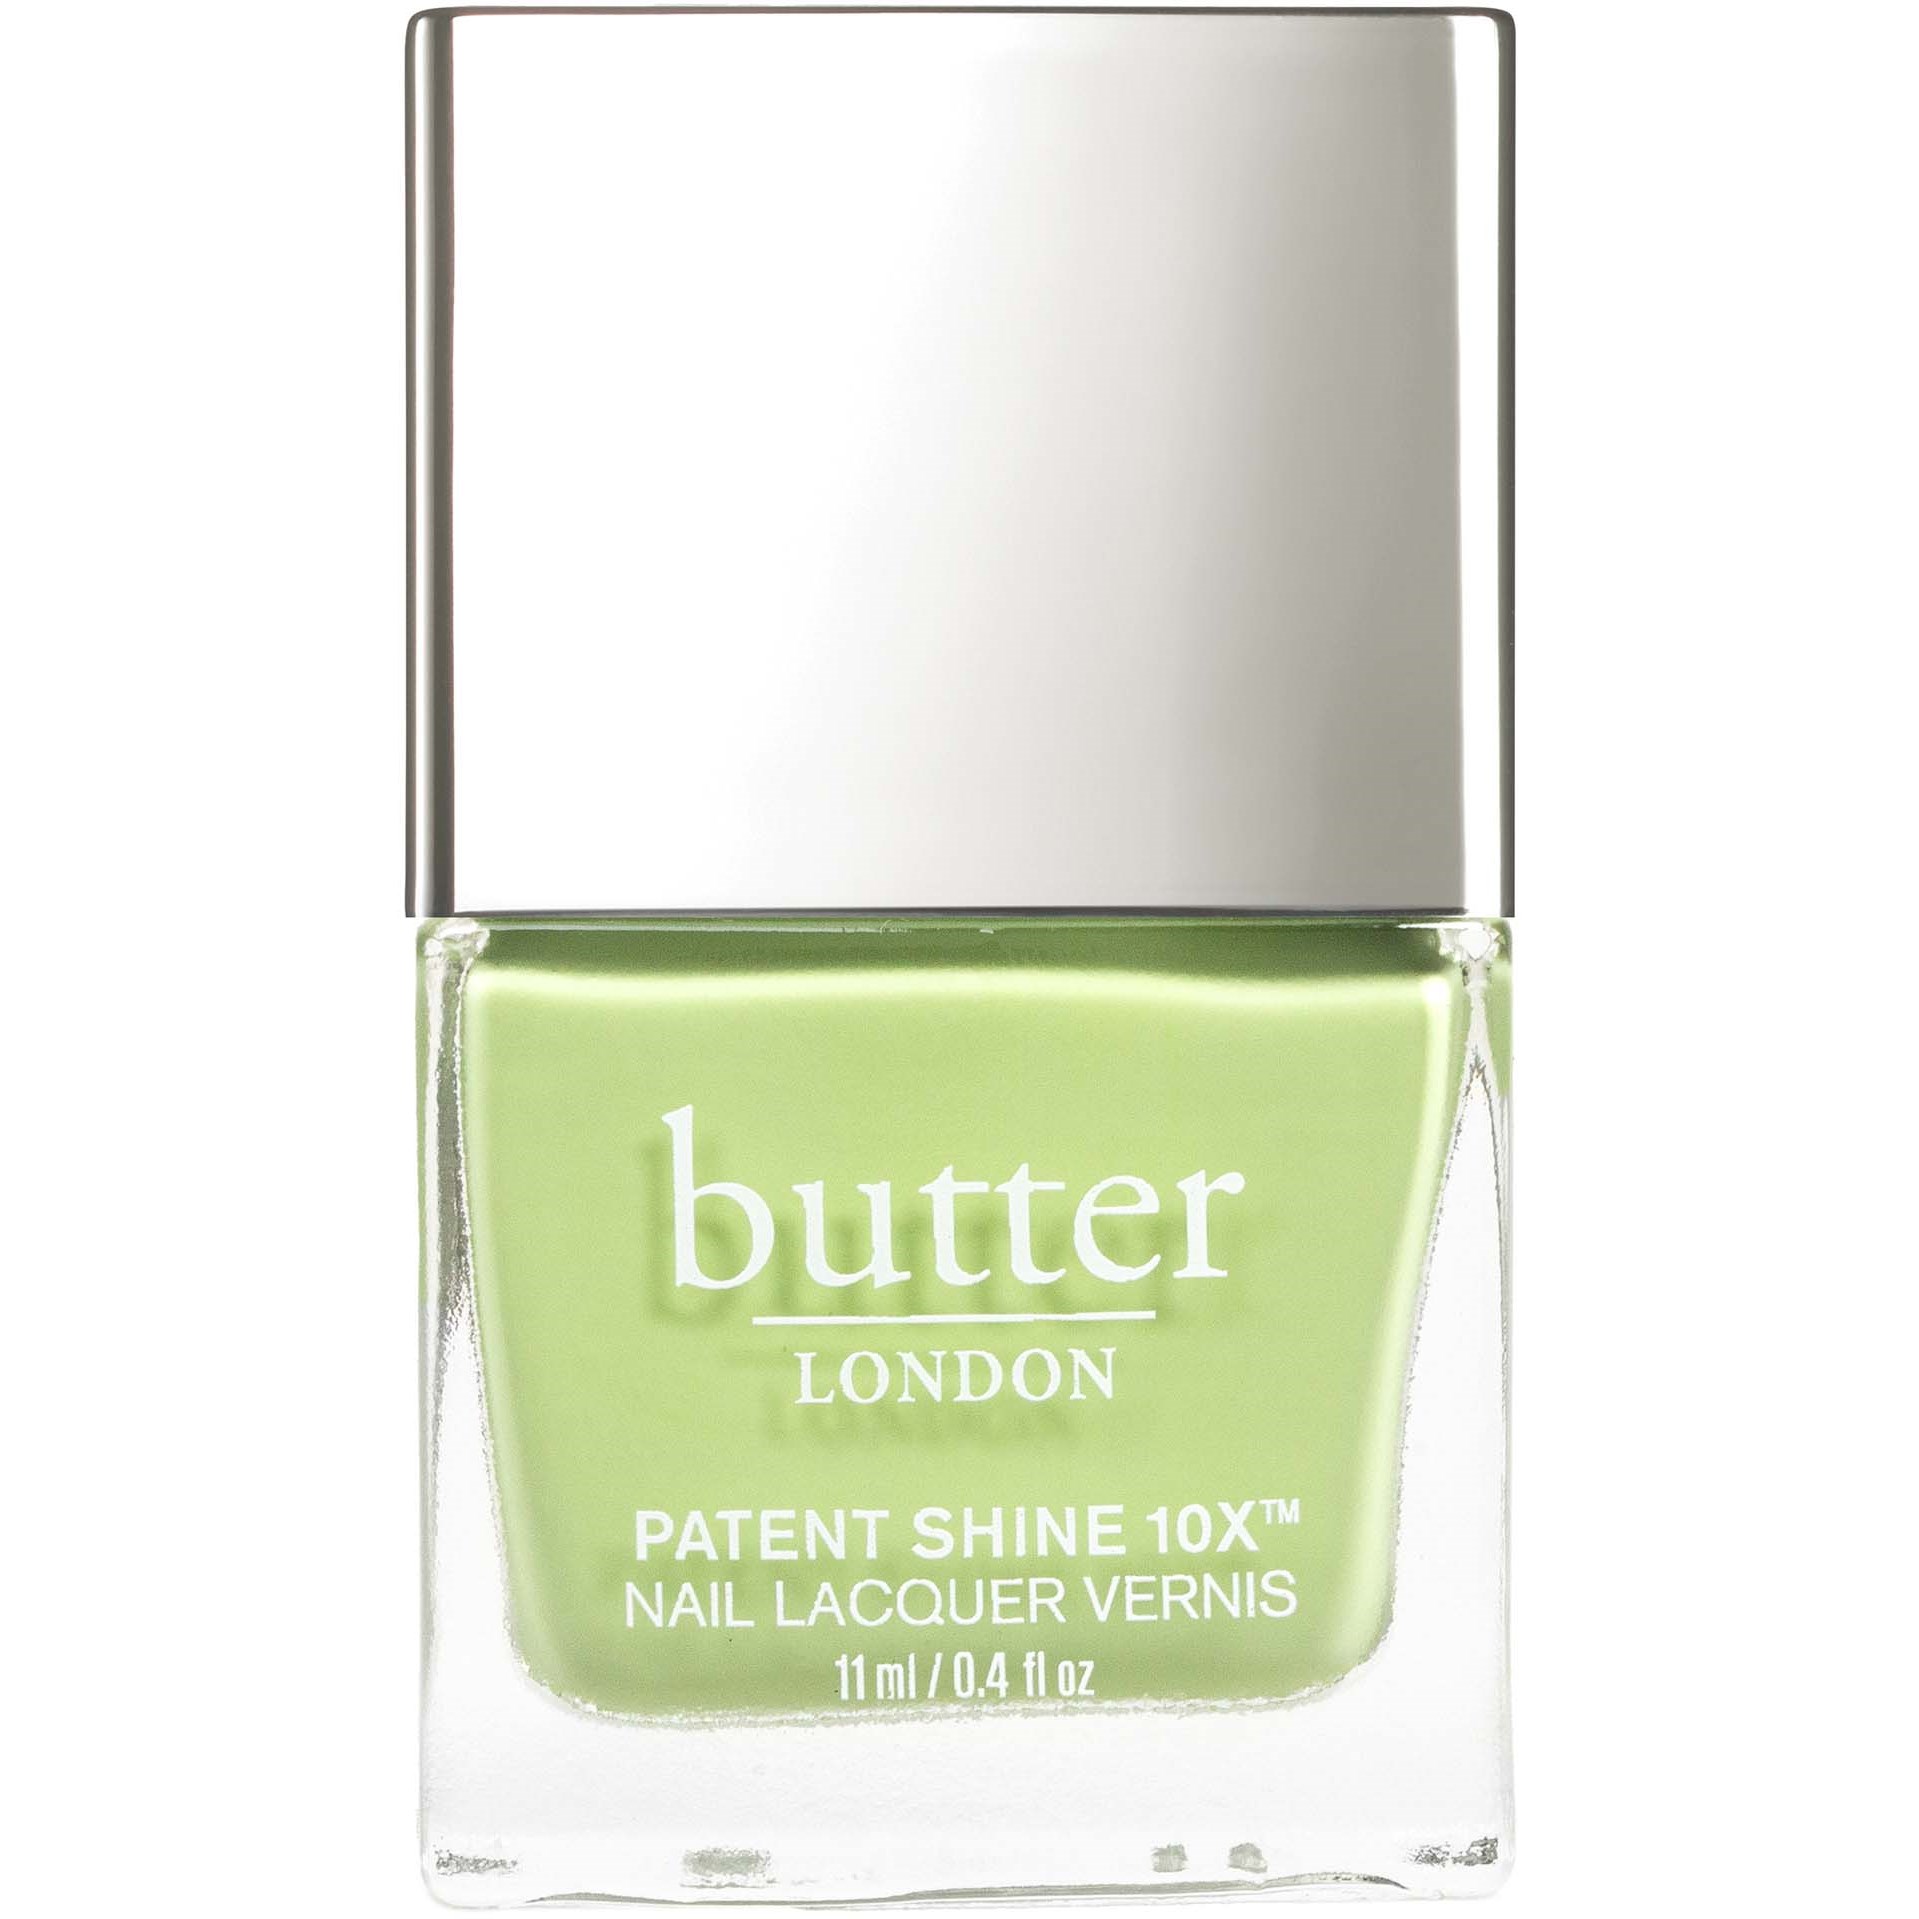 butter London Patent Shine 10X Nail Lacquer Garden Party